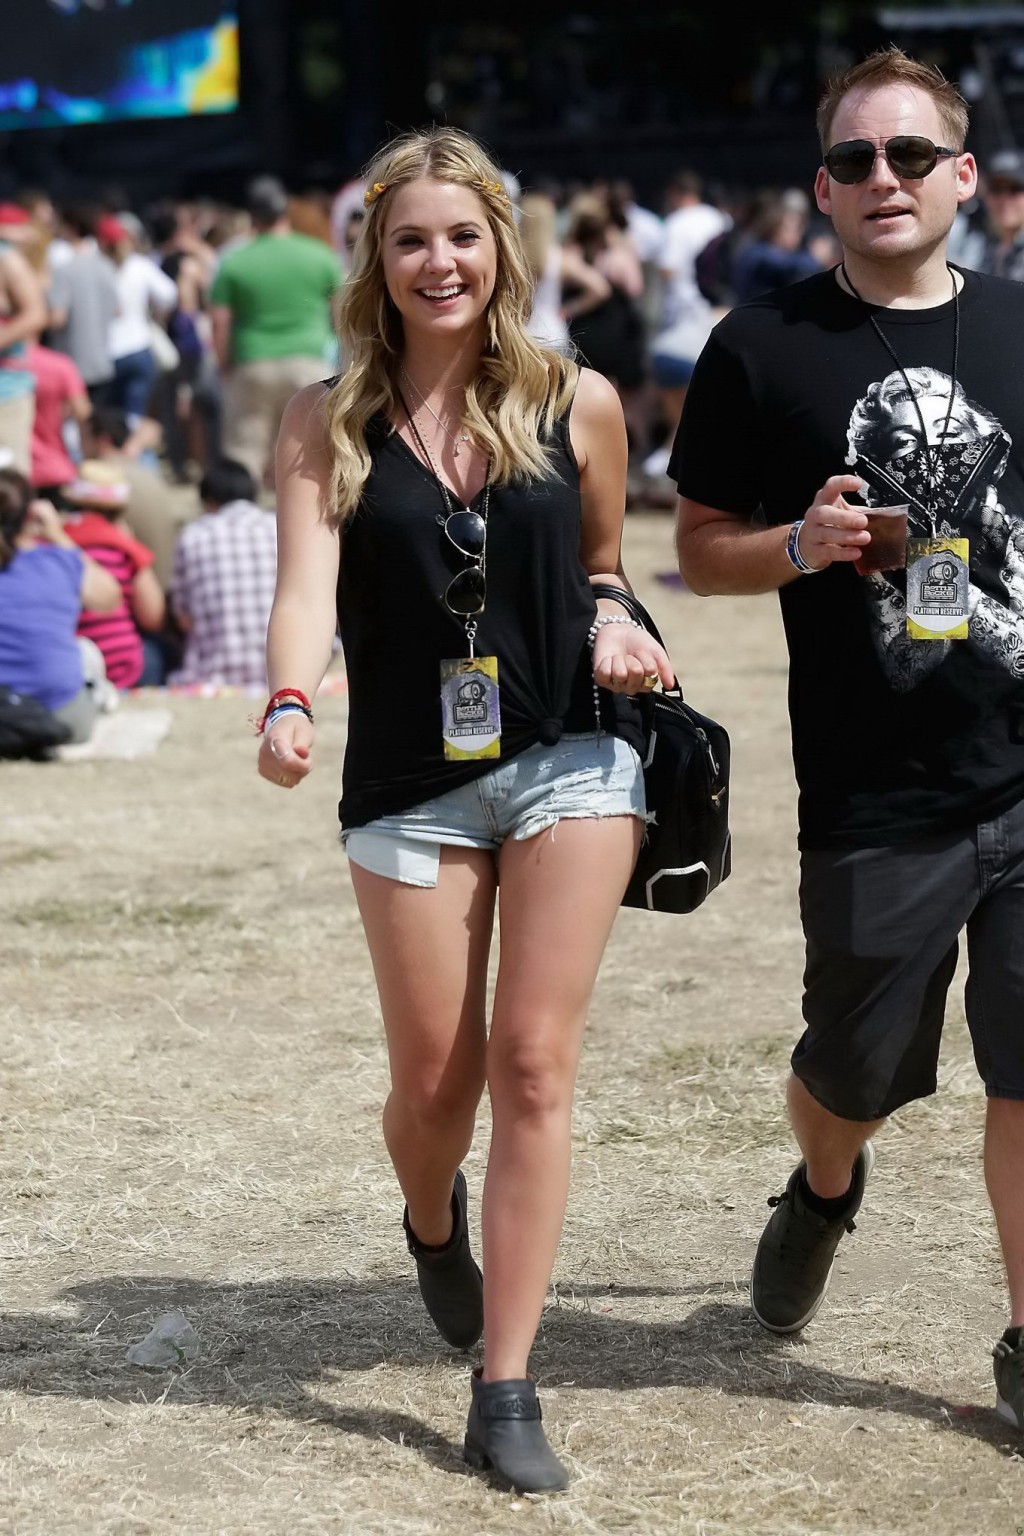 Ashley Benson wearing transparent tank top and hotpants at the Bandeau festival  #75232530